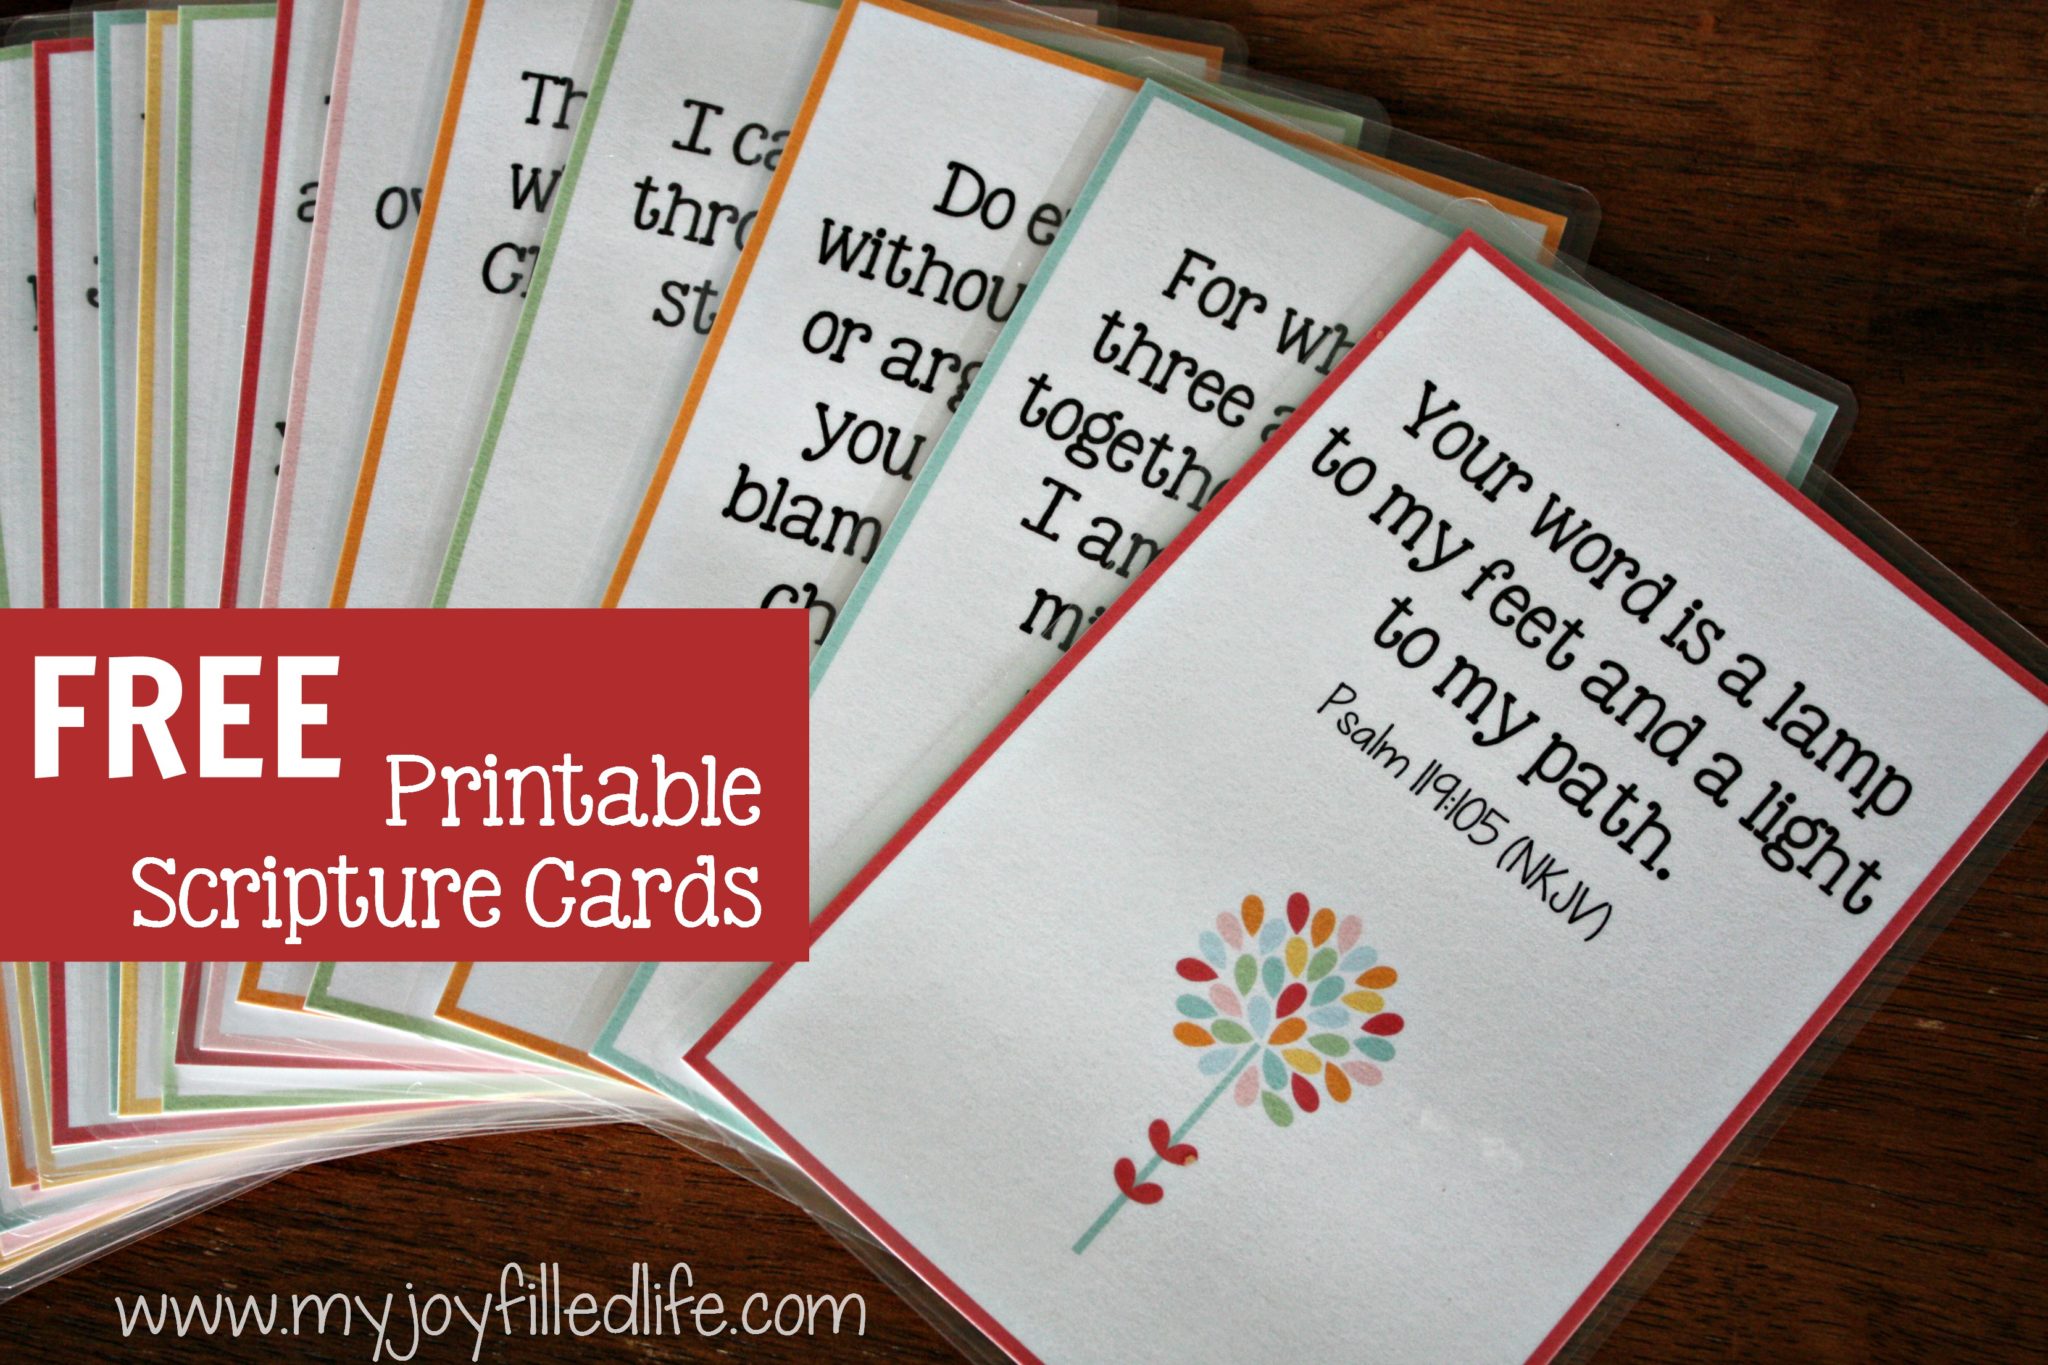 hide-em-in-your-heart-scripture-cards-free-printable-my-joy-filled